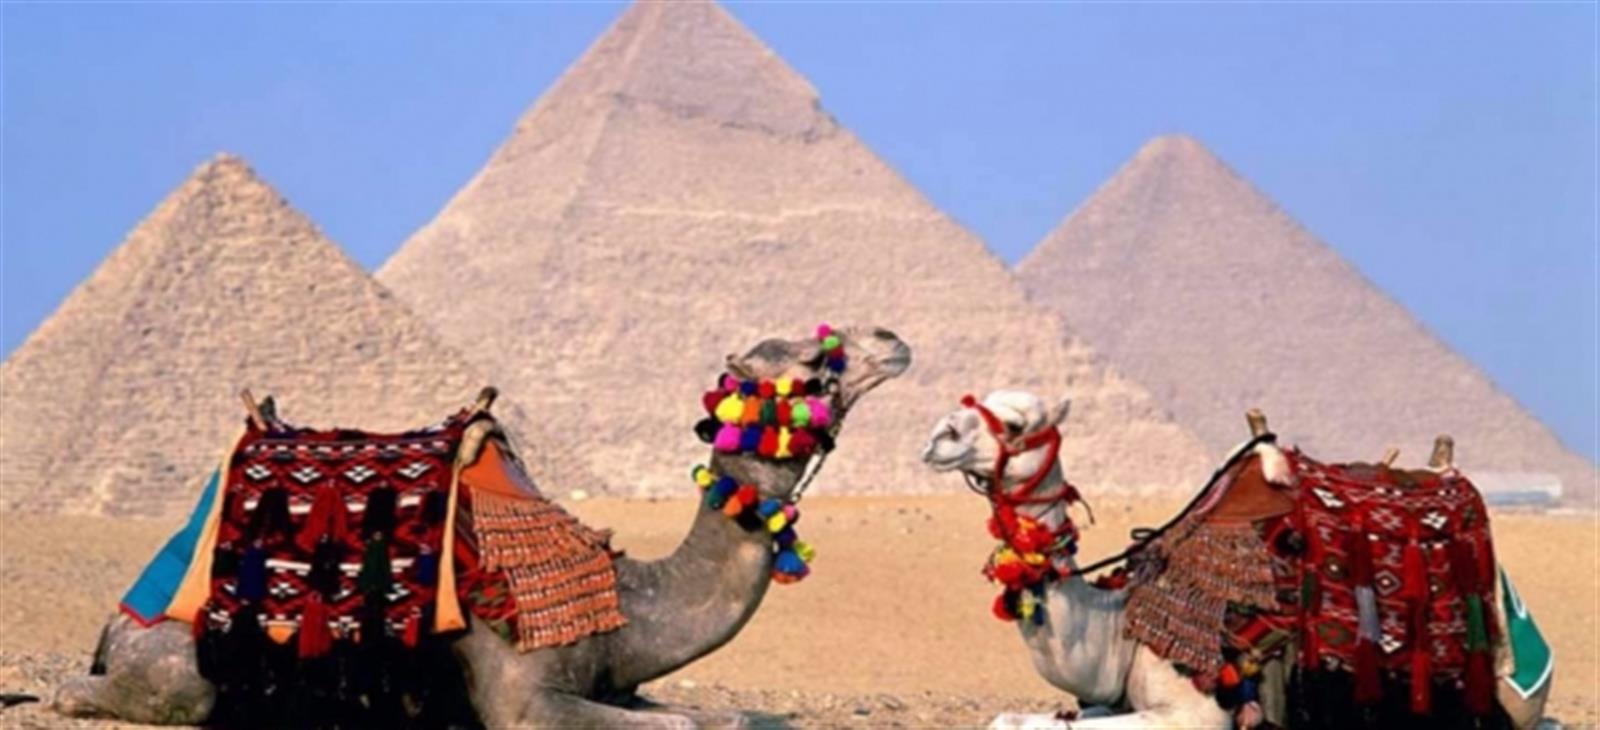 tours from luxor to cairo